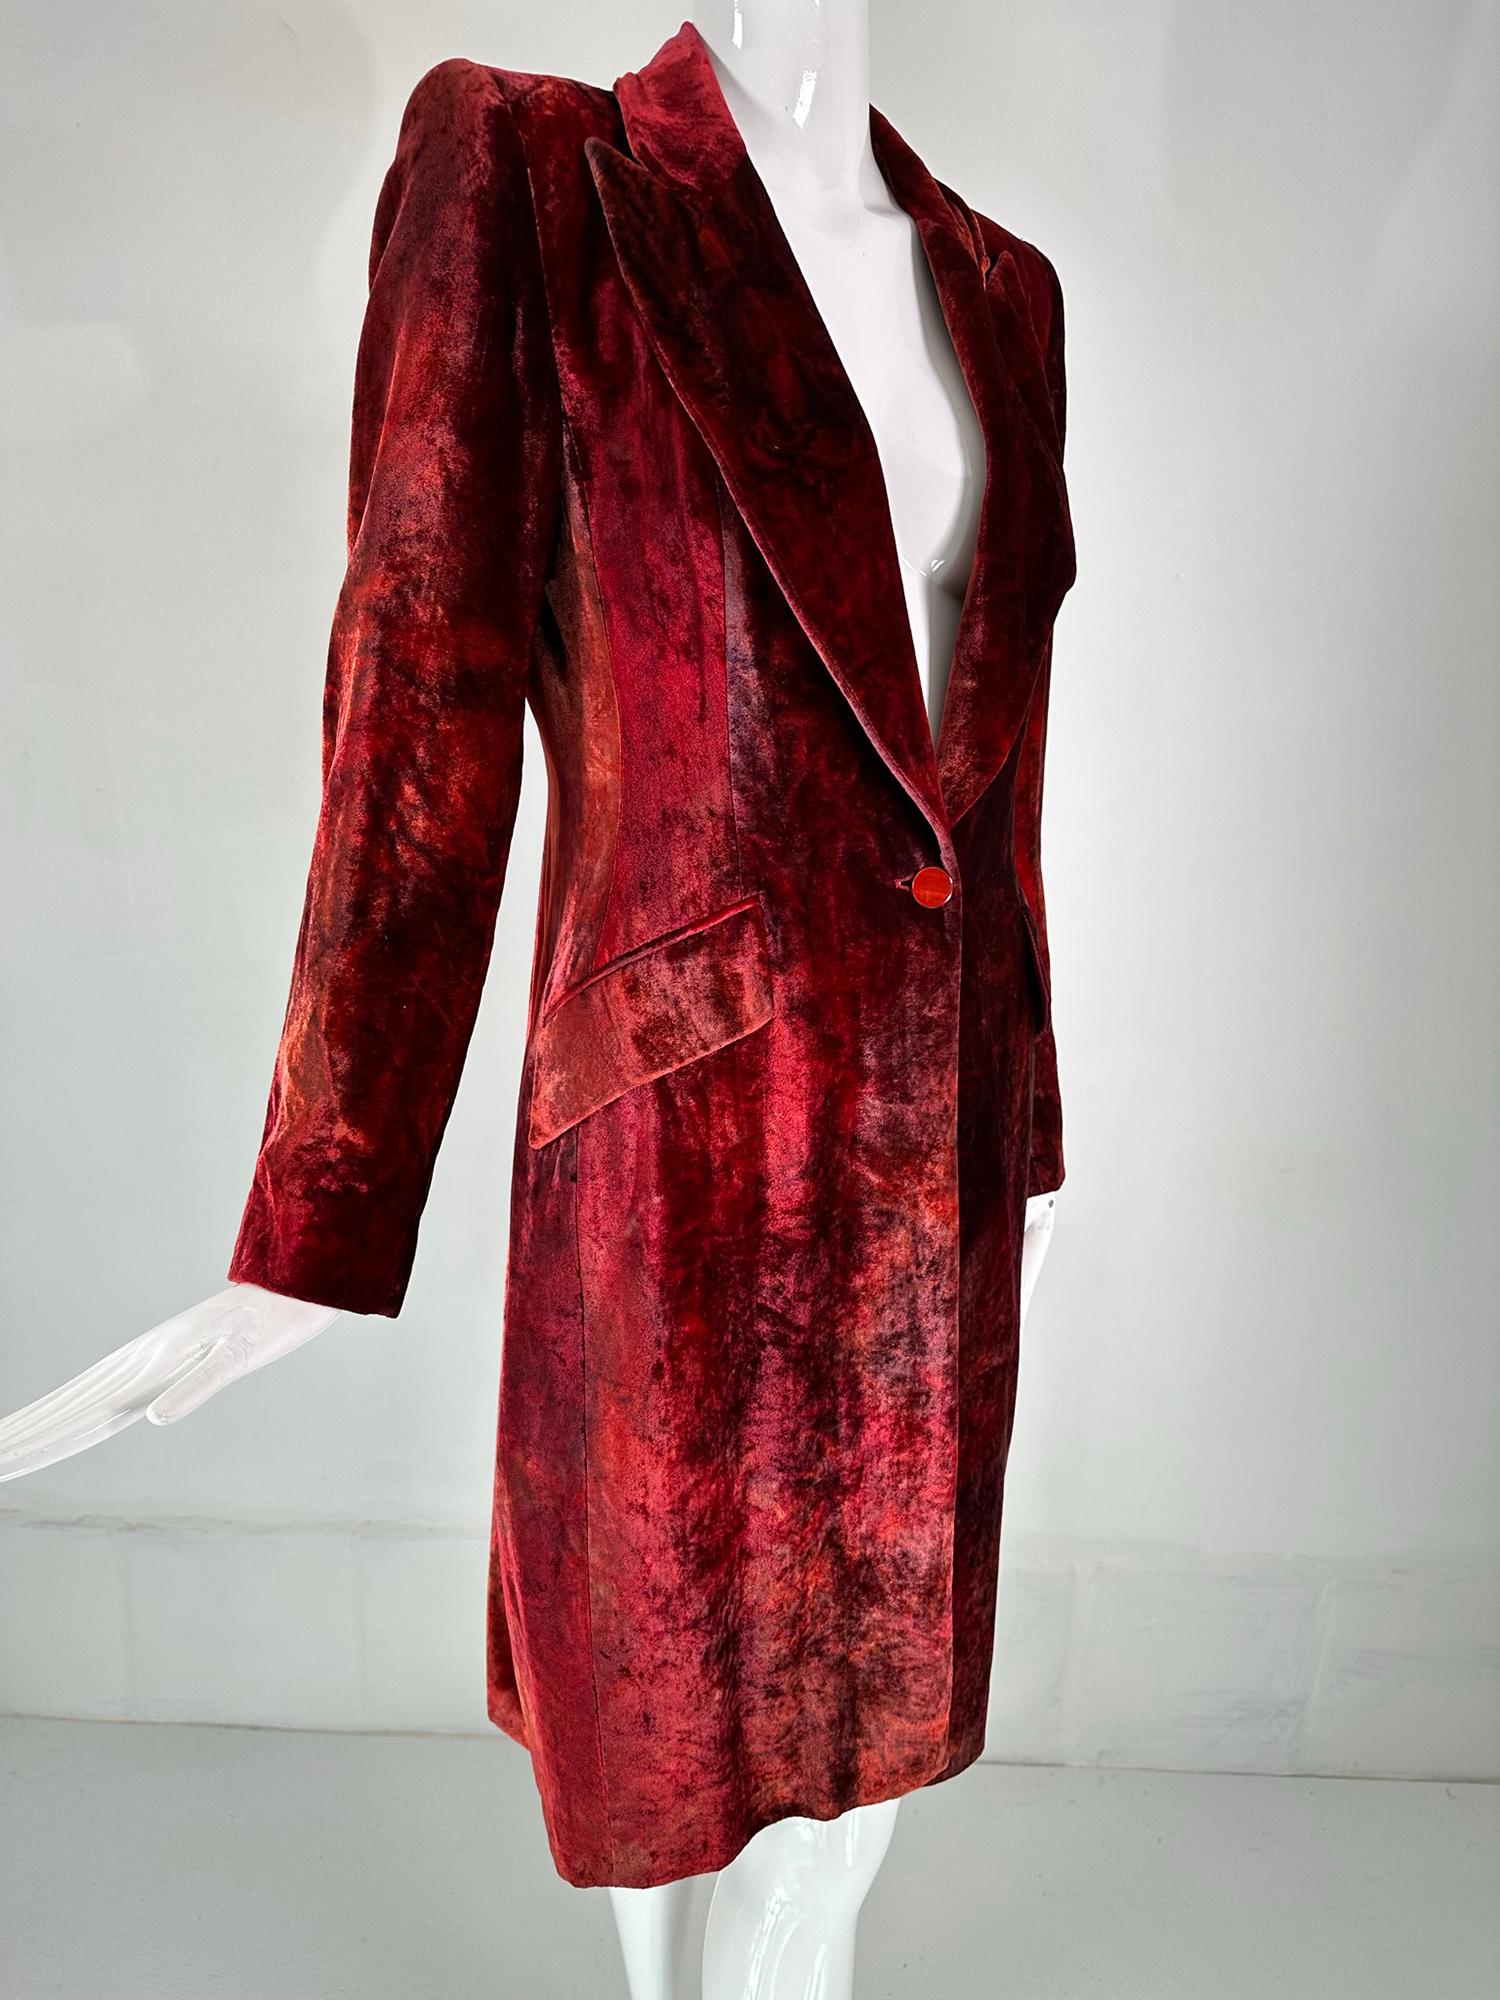 Stella Cadante Paris custom dyed velvet princess style coat. Narrow notched lapel coat closes at the waist front with a single red button, there are two angled hip flap non working  pockets at either side. Fitted through the waist. Long sleeves have